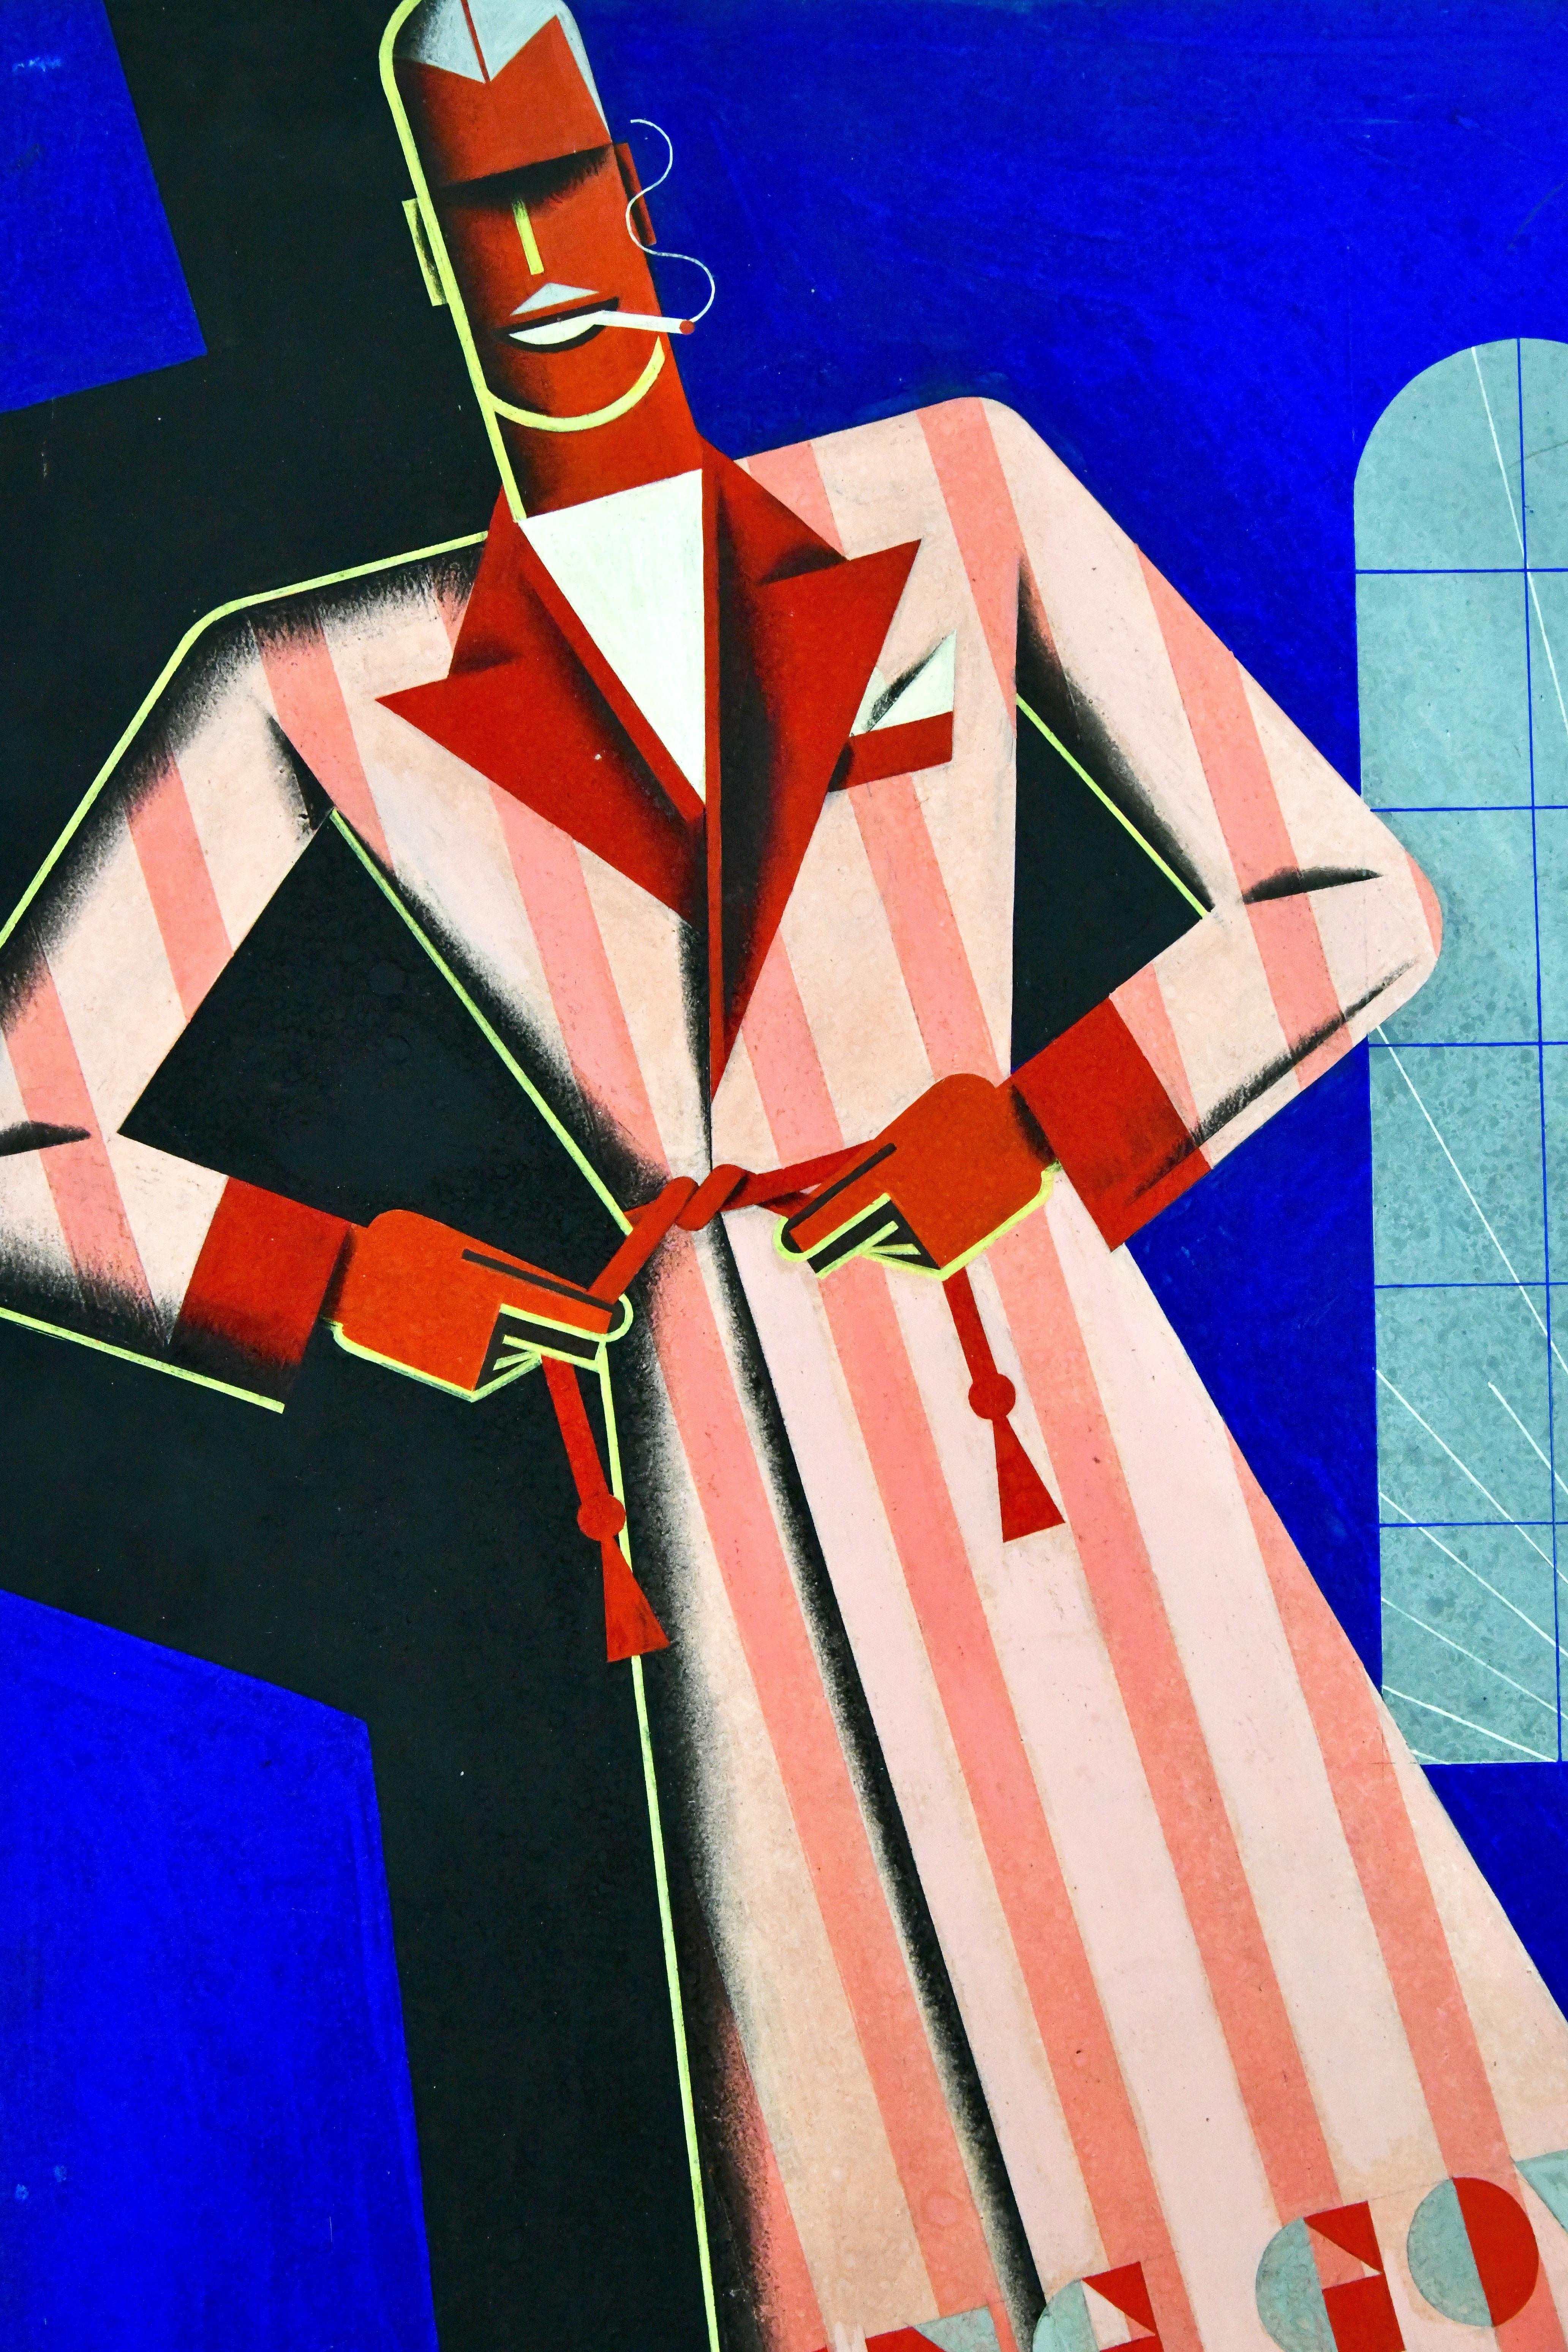 Art Deco poster design man in dressing gown by Theodor Kindel. Gouache on paper laid on board. Unframed. Austria 1920/1940. Theodor Kindel was a well known graphic artist who worked in Vienna between 1920-1940. He was the owner of a renowned Reclame